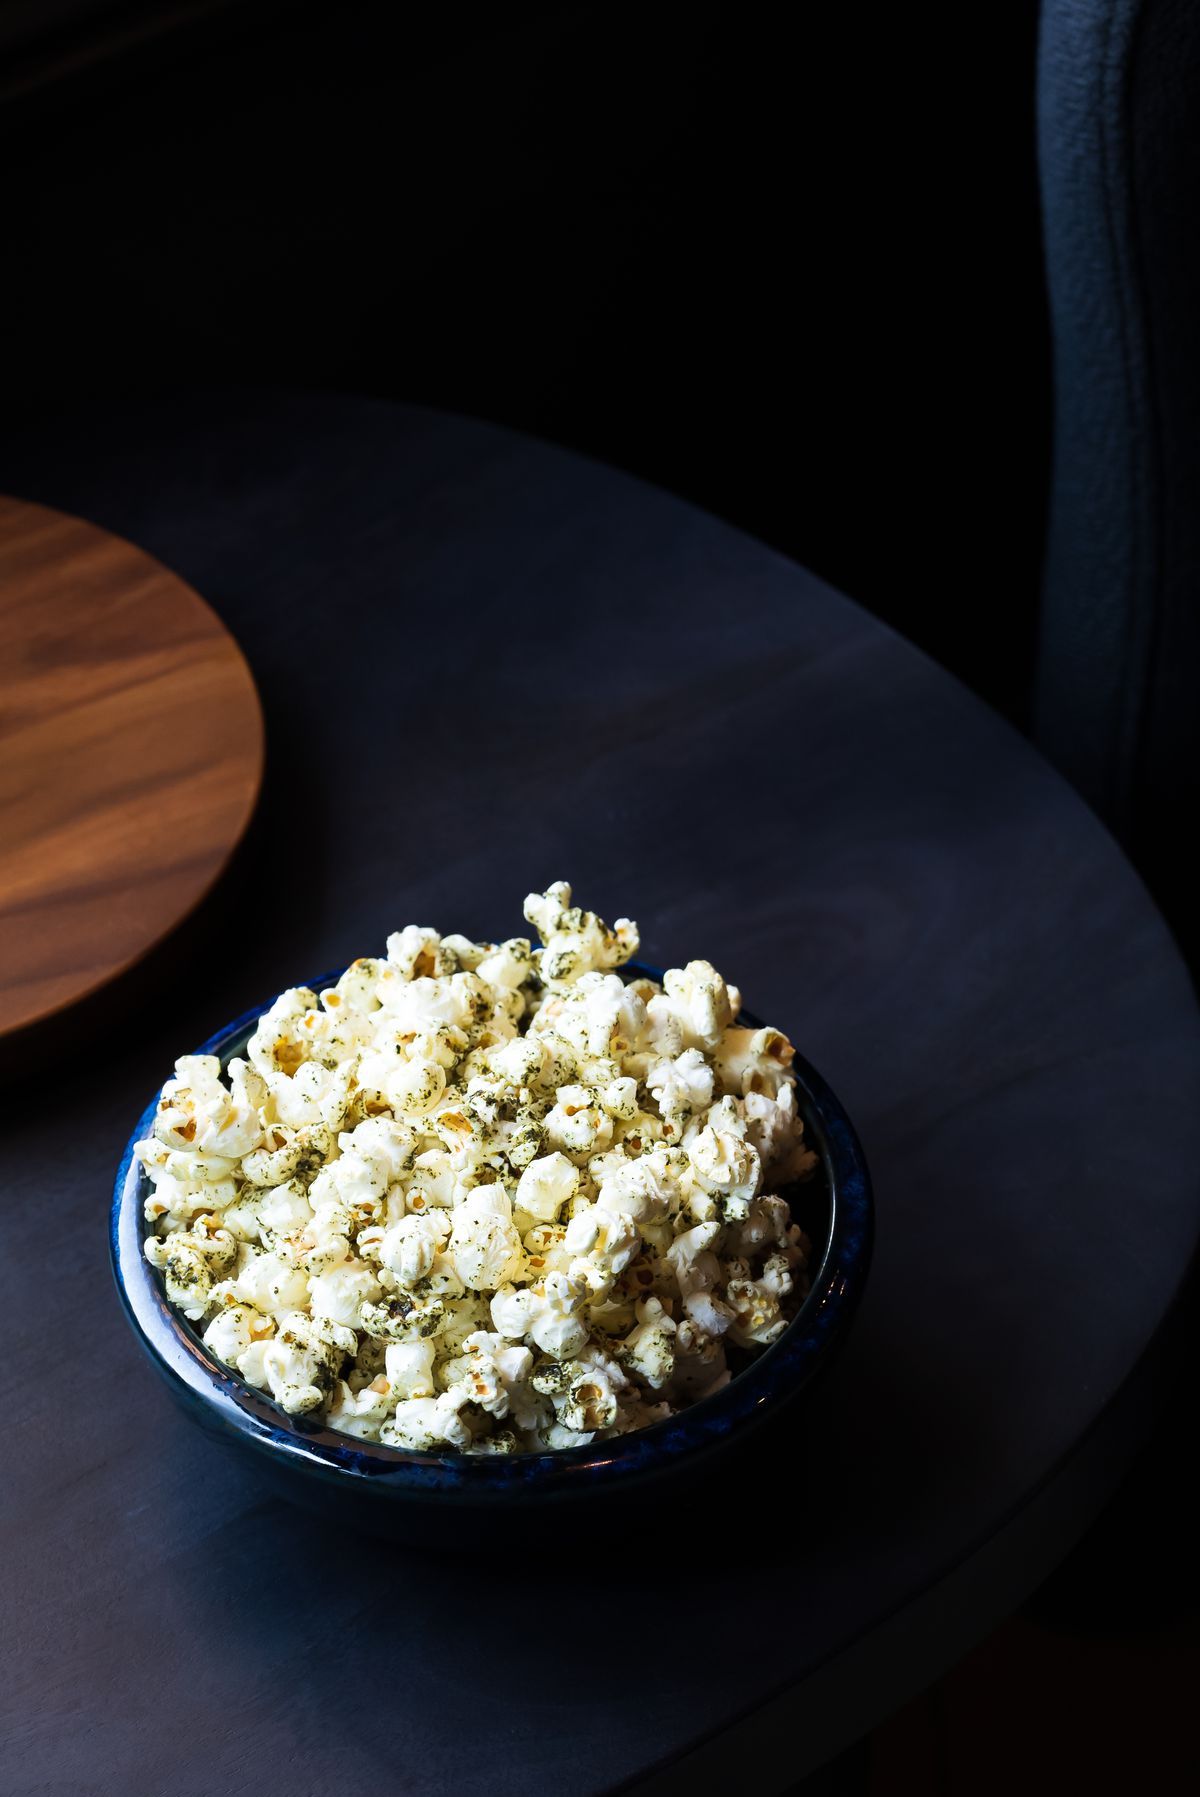 A black ceramic bowl filled with popcorn topped with furikake.